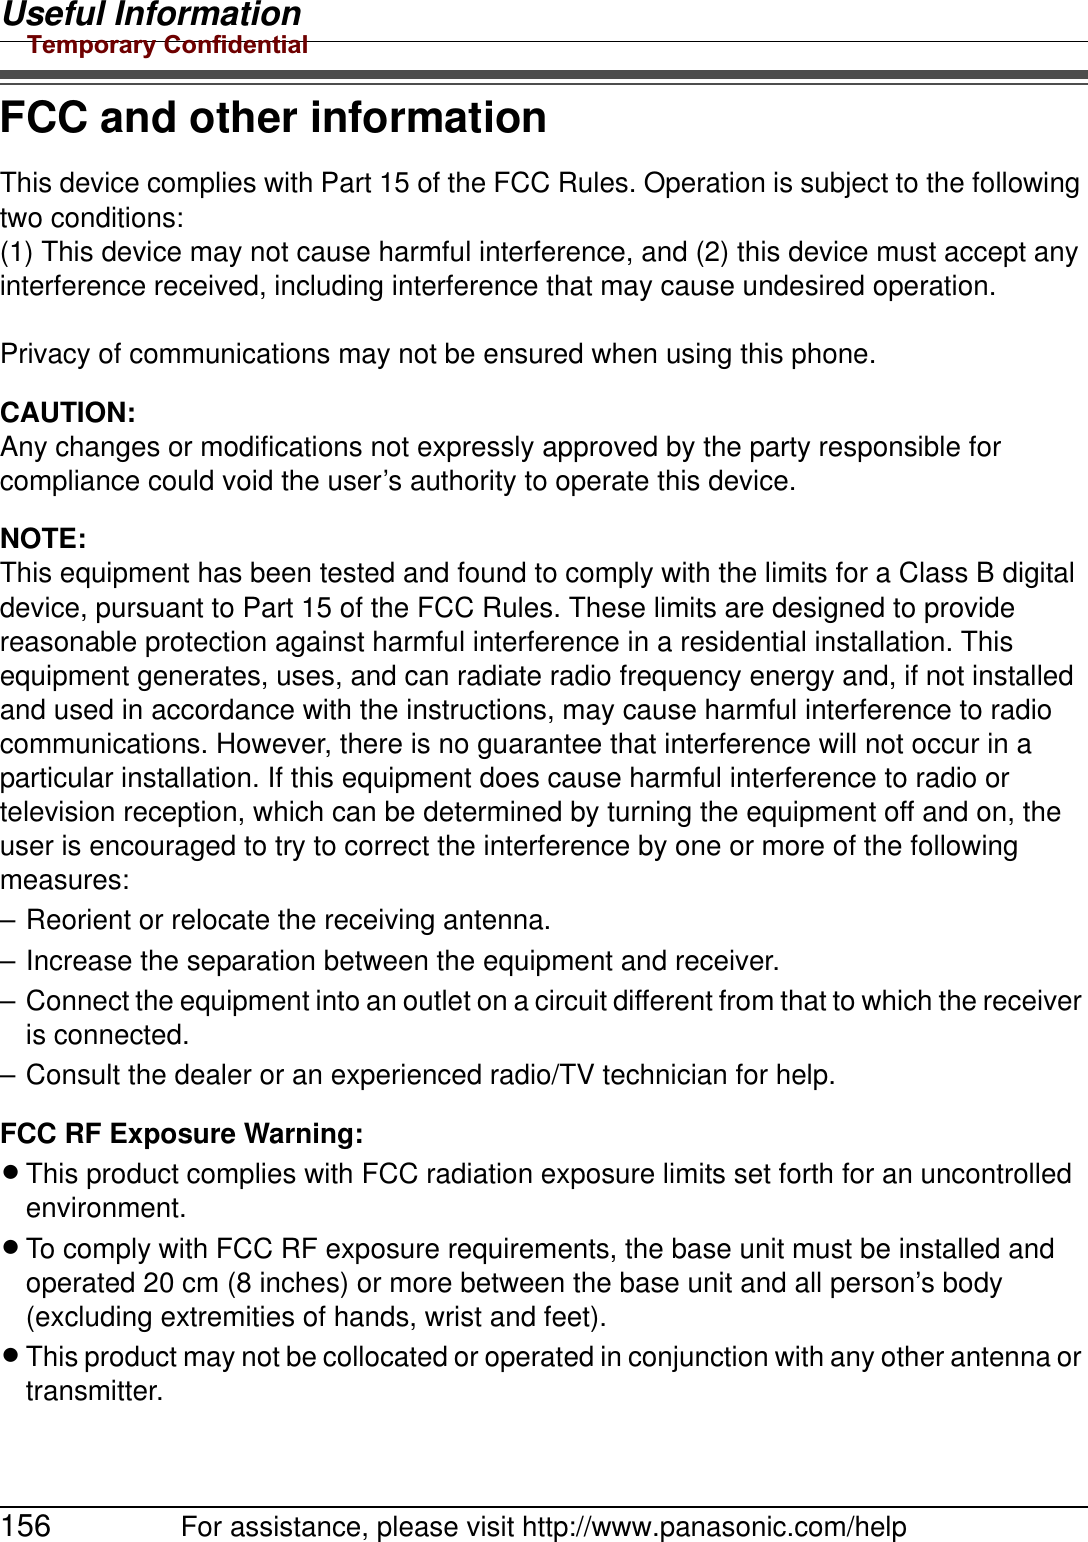 Useful Information156 For assistance, please visit http://www.panasonic.com/helpFCC and other informationThis device complies with Part 15 of the FCC Rules. Operation is subject to the following two conditions:(1) This device may not cause harmful interference, and (2) this device must accept any interference received, including interference that may cause undesired operation. Privacy of communications may not be ensured when using this phone.CAUTION:Any changes or modifications not expressly approved by the party responsible for compliance could void the user’s authority to operate this device.NOTE:This equipment has been tested and found to comply with the limits for a Class B digital device, pursuant to Part 15 of the FCC Rules. These limits are designed to provide reasonable protection against harmful interference in a residential installation. This equipment generates, uses, and can radiate radio frequency energy and, if not installed and used in accordance with the instructions, may cause harmful interference to radio communications. However, there is no guarantee that interference will not occur in a particular installation. If this equipment does cause harmful interference to radio or television reception, which can be determined by turning the equipment off and on, the user is encouraged to try to correct the interference by one or more of the following measures:– Reorient or relocate the receiving antenna.– Increase the separation between the equipment and receiver.– Connect the equipment into an outlet on a circuit different from that to which the receiver is connected.– Consult the dealer or an experienced radio/TV technician for help.FCC RF Exposure Warning:LThis product complies with FCC radiation exposure limits set forth for an uncontrolled environment. LTo comply with FCC RF exposure requirements, the base unit must be installed and operated 20 cm (8 inches) or more between the base unit and all person’s body (excluding extremities of hands, wrist and feet). LThis product may not be collocated or operated in conjunction with any other antenna or transmitter.Temporary Confidential